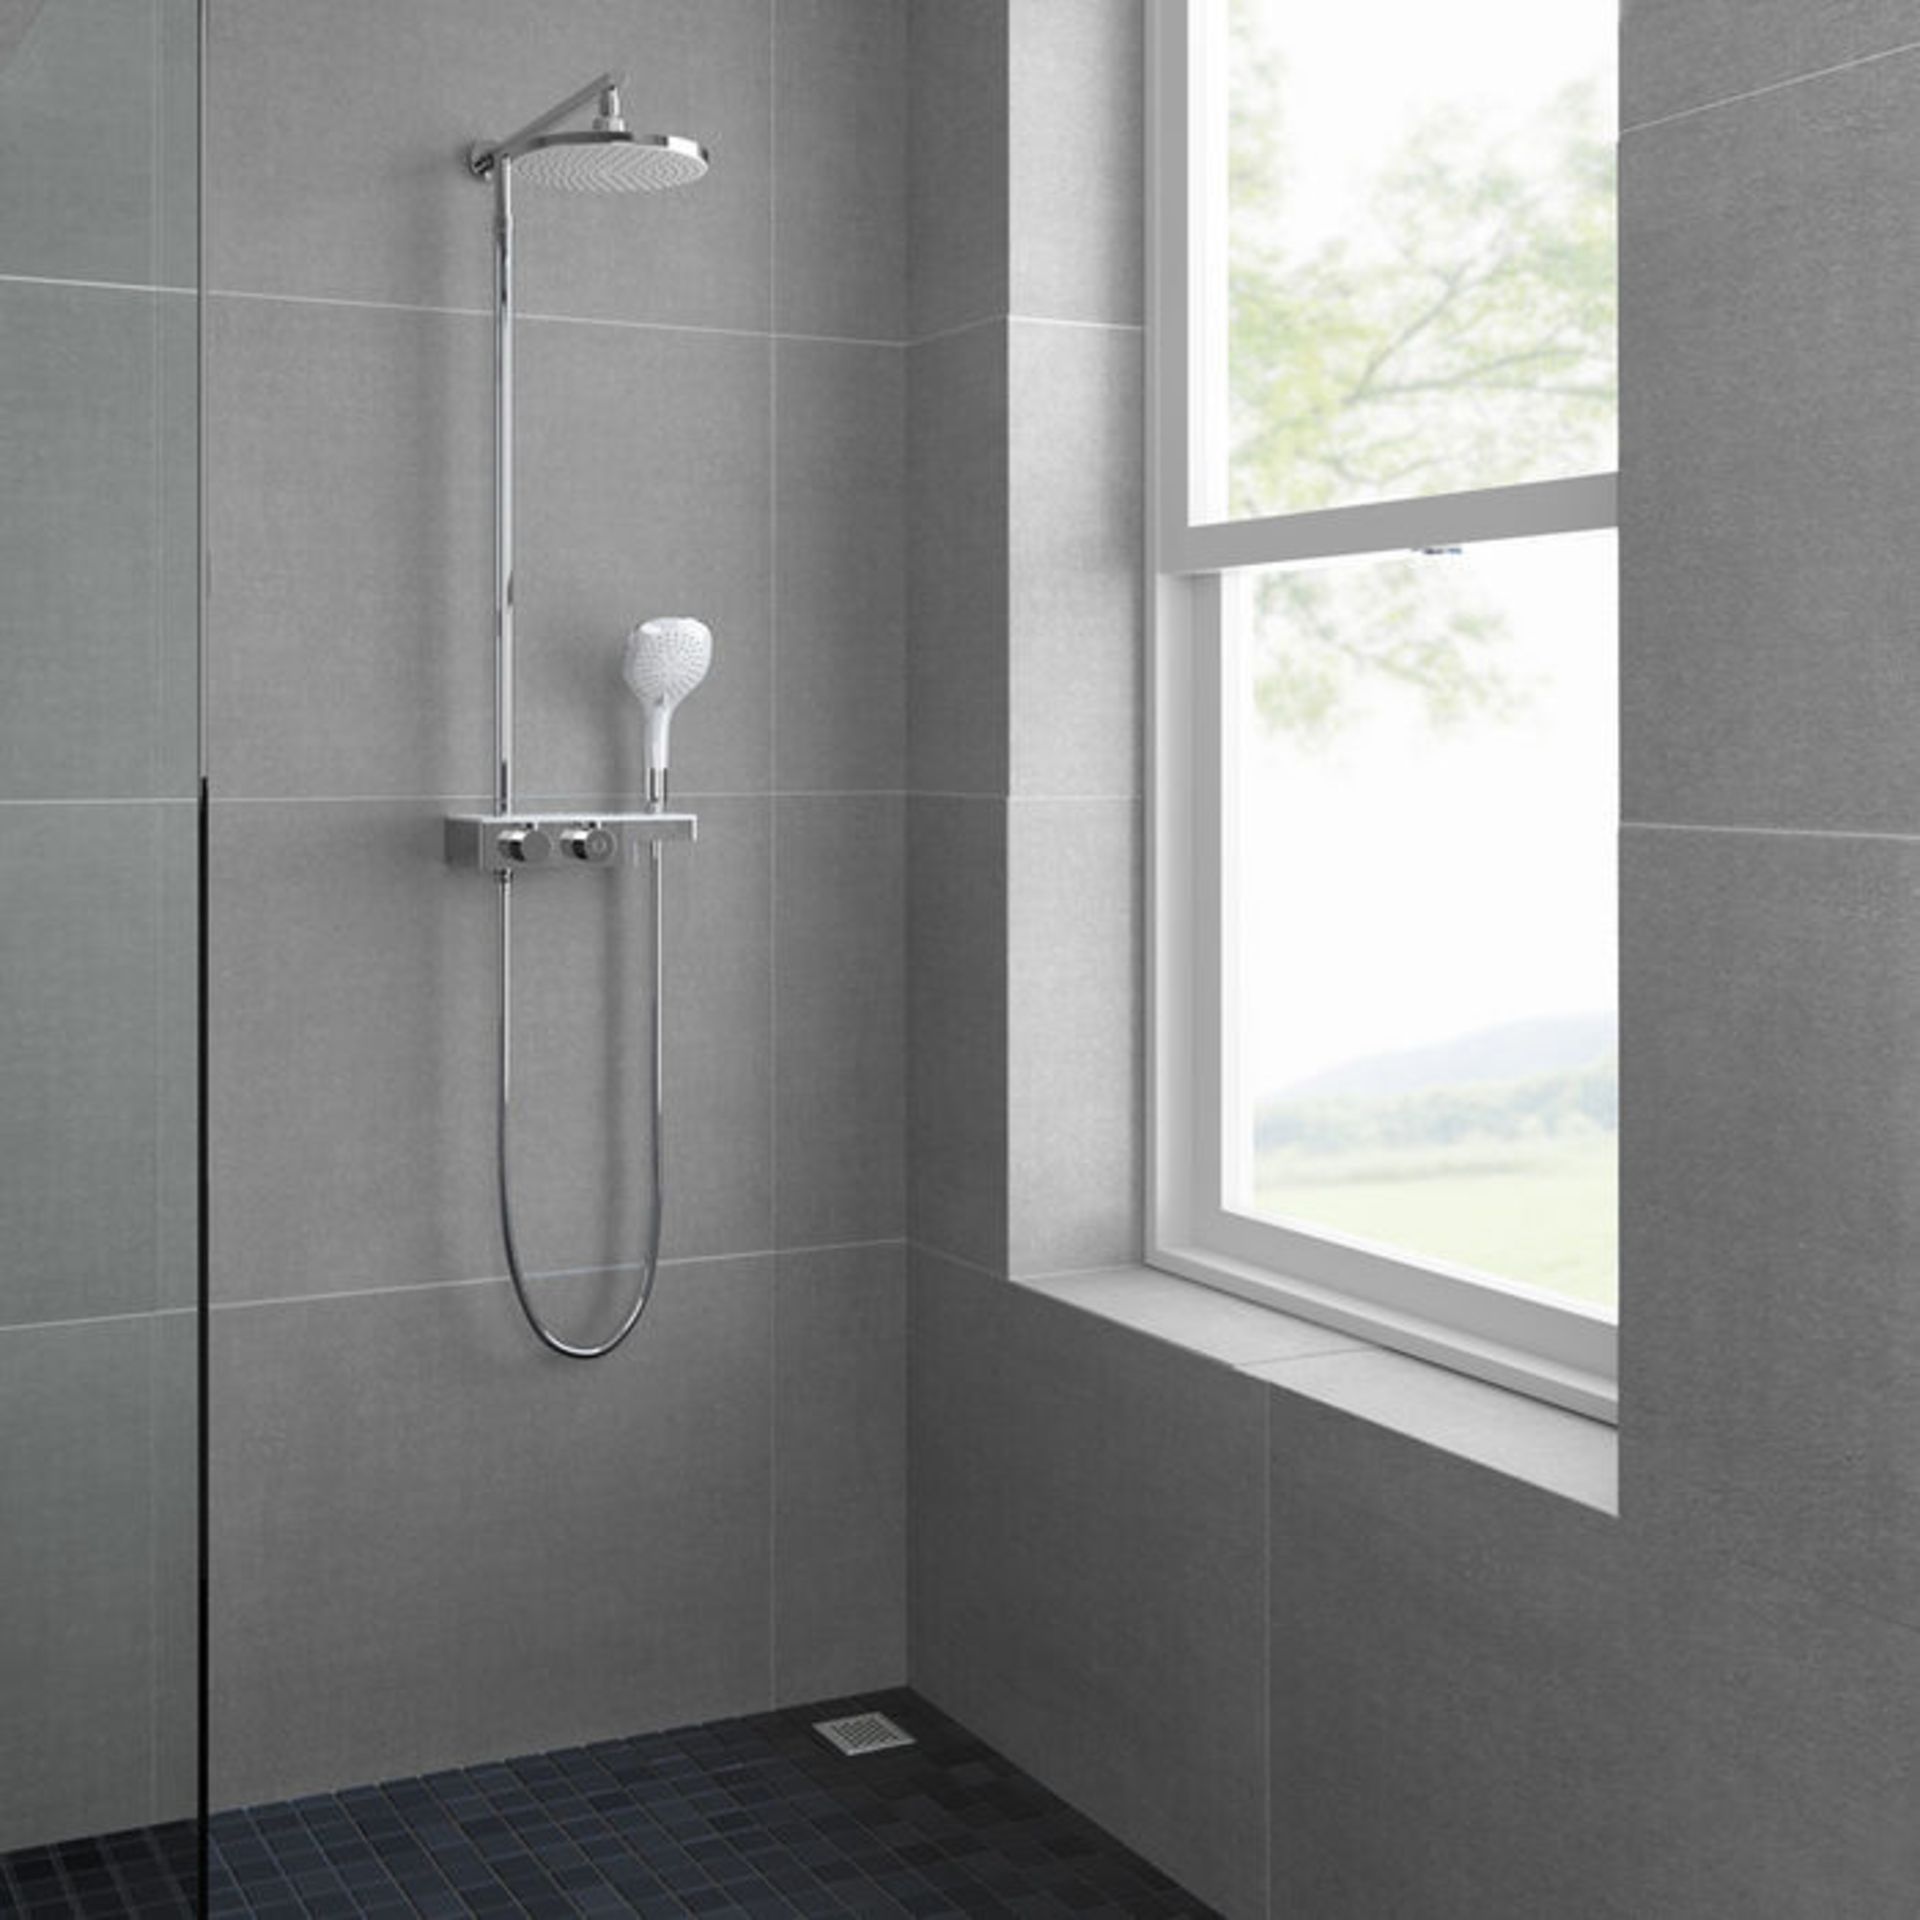 (LL70) Round Exposed Thermostatic Mixer Shower Kit Medium Head & Shelf. Cool to touch shower for - Image 4 of 5